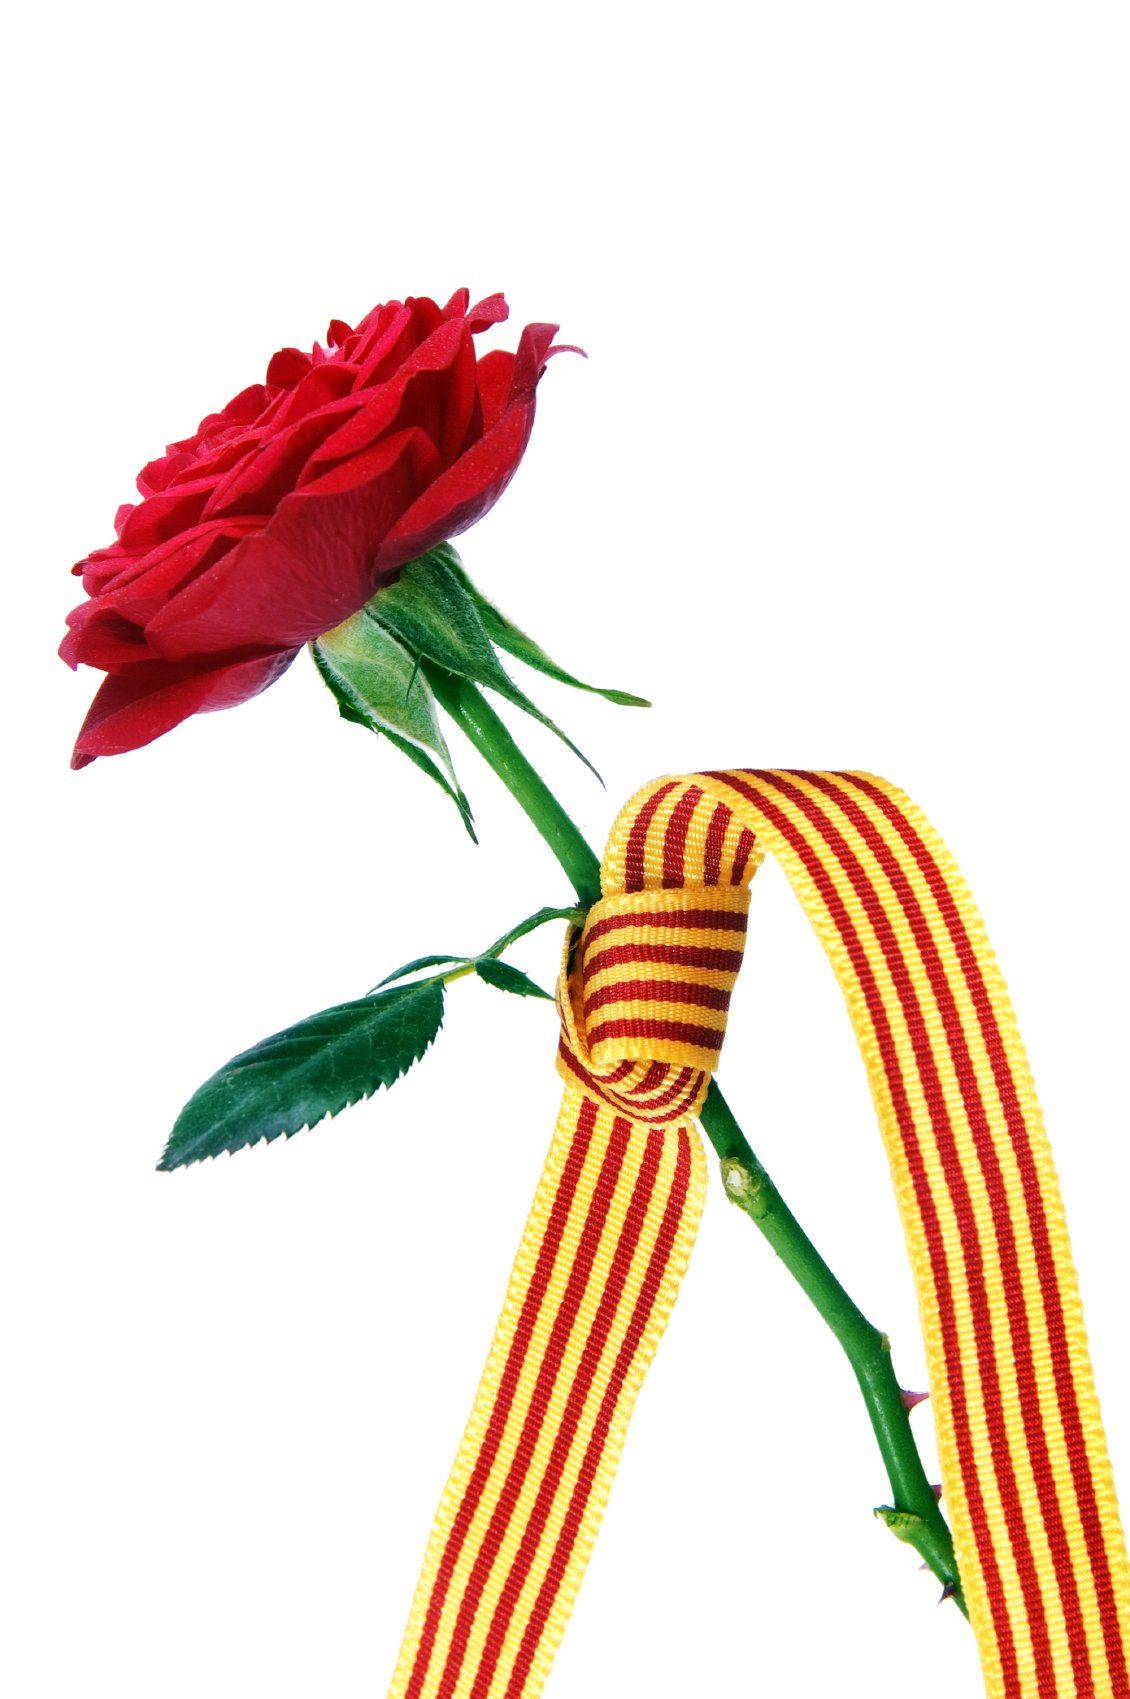 A single, red rose, with striped ribbon wrapped around stem.